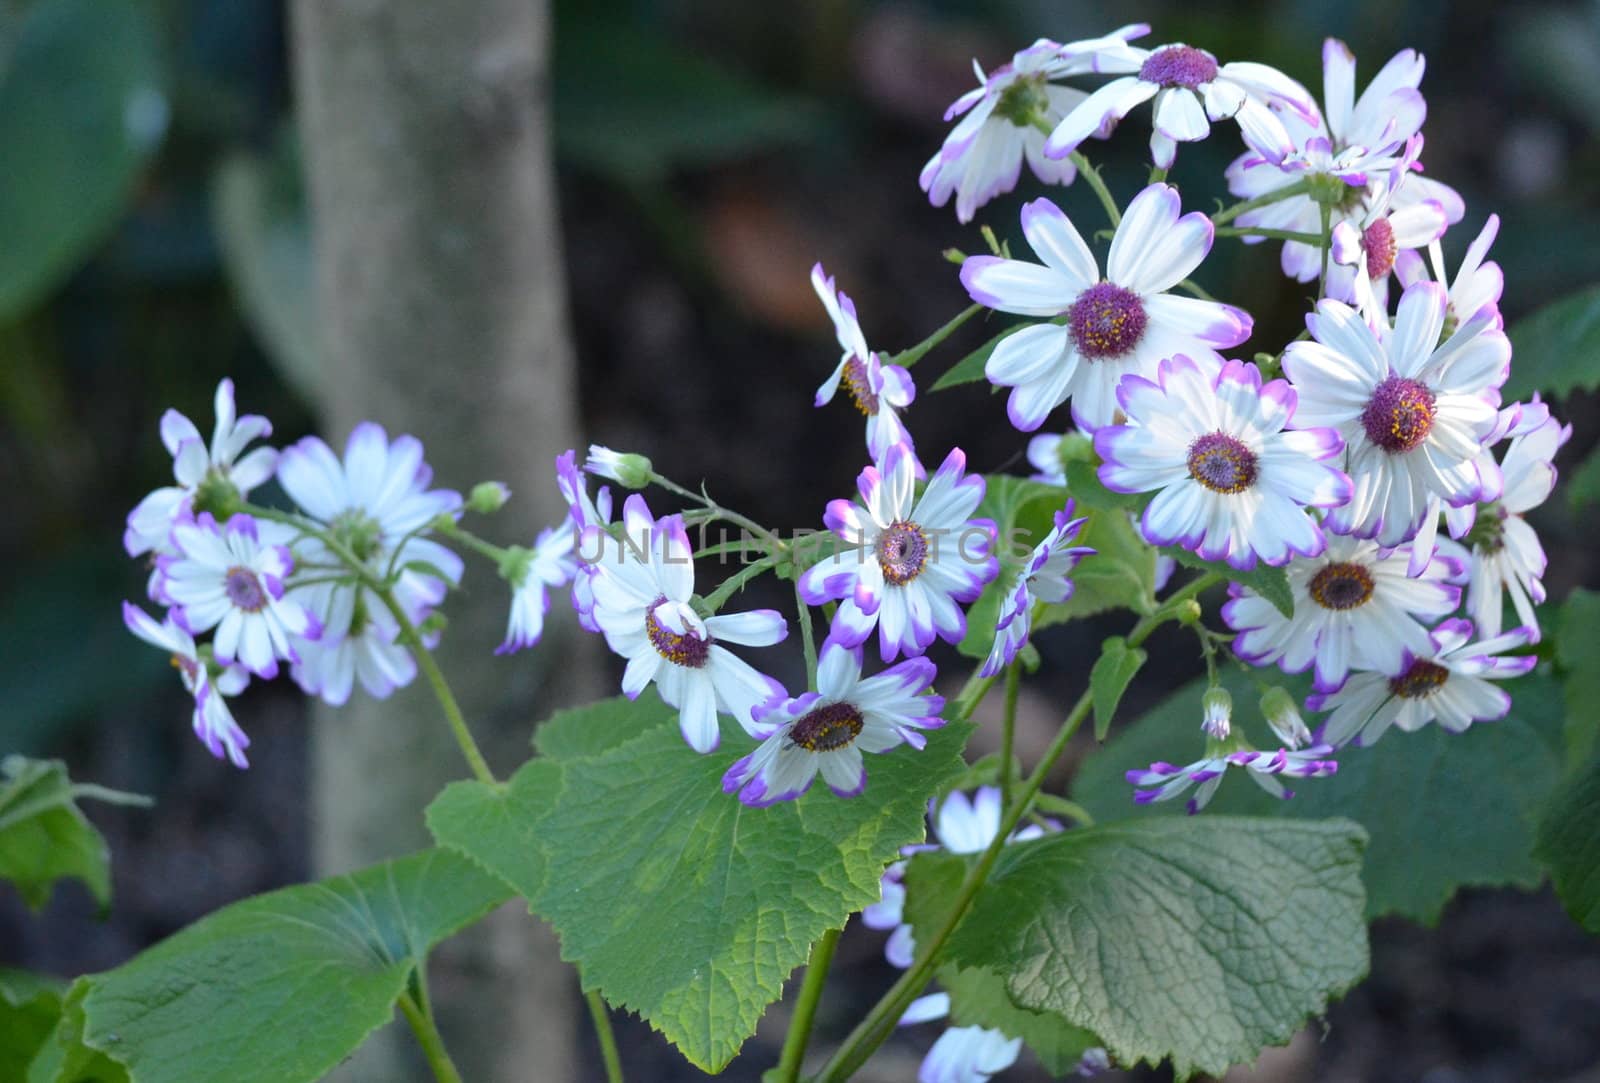 White flowers with purple edges in a garden